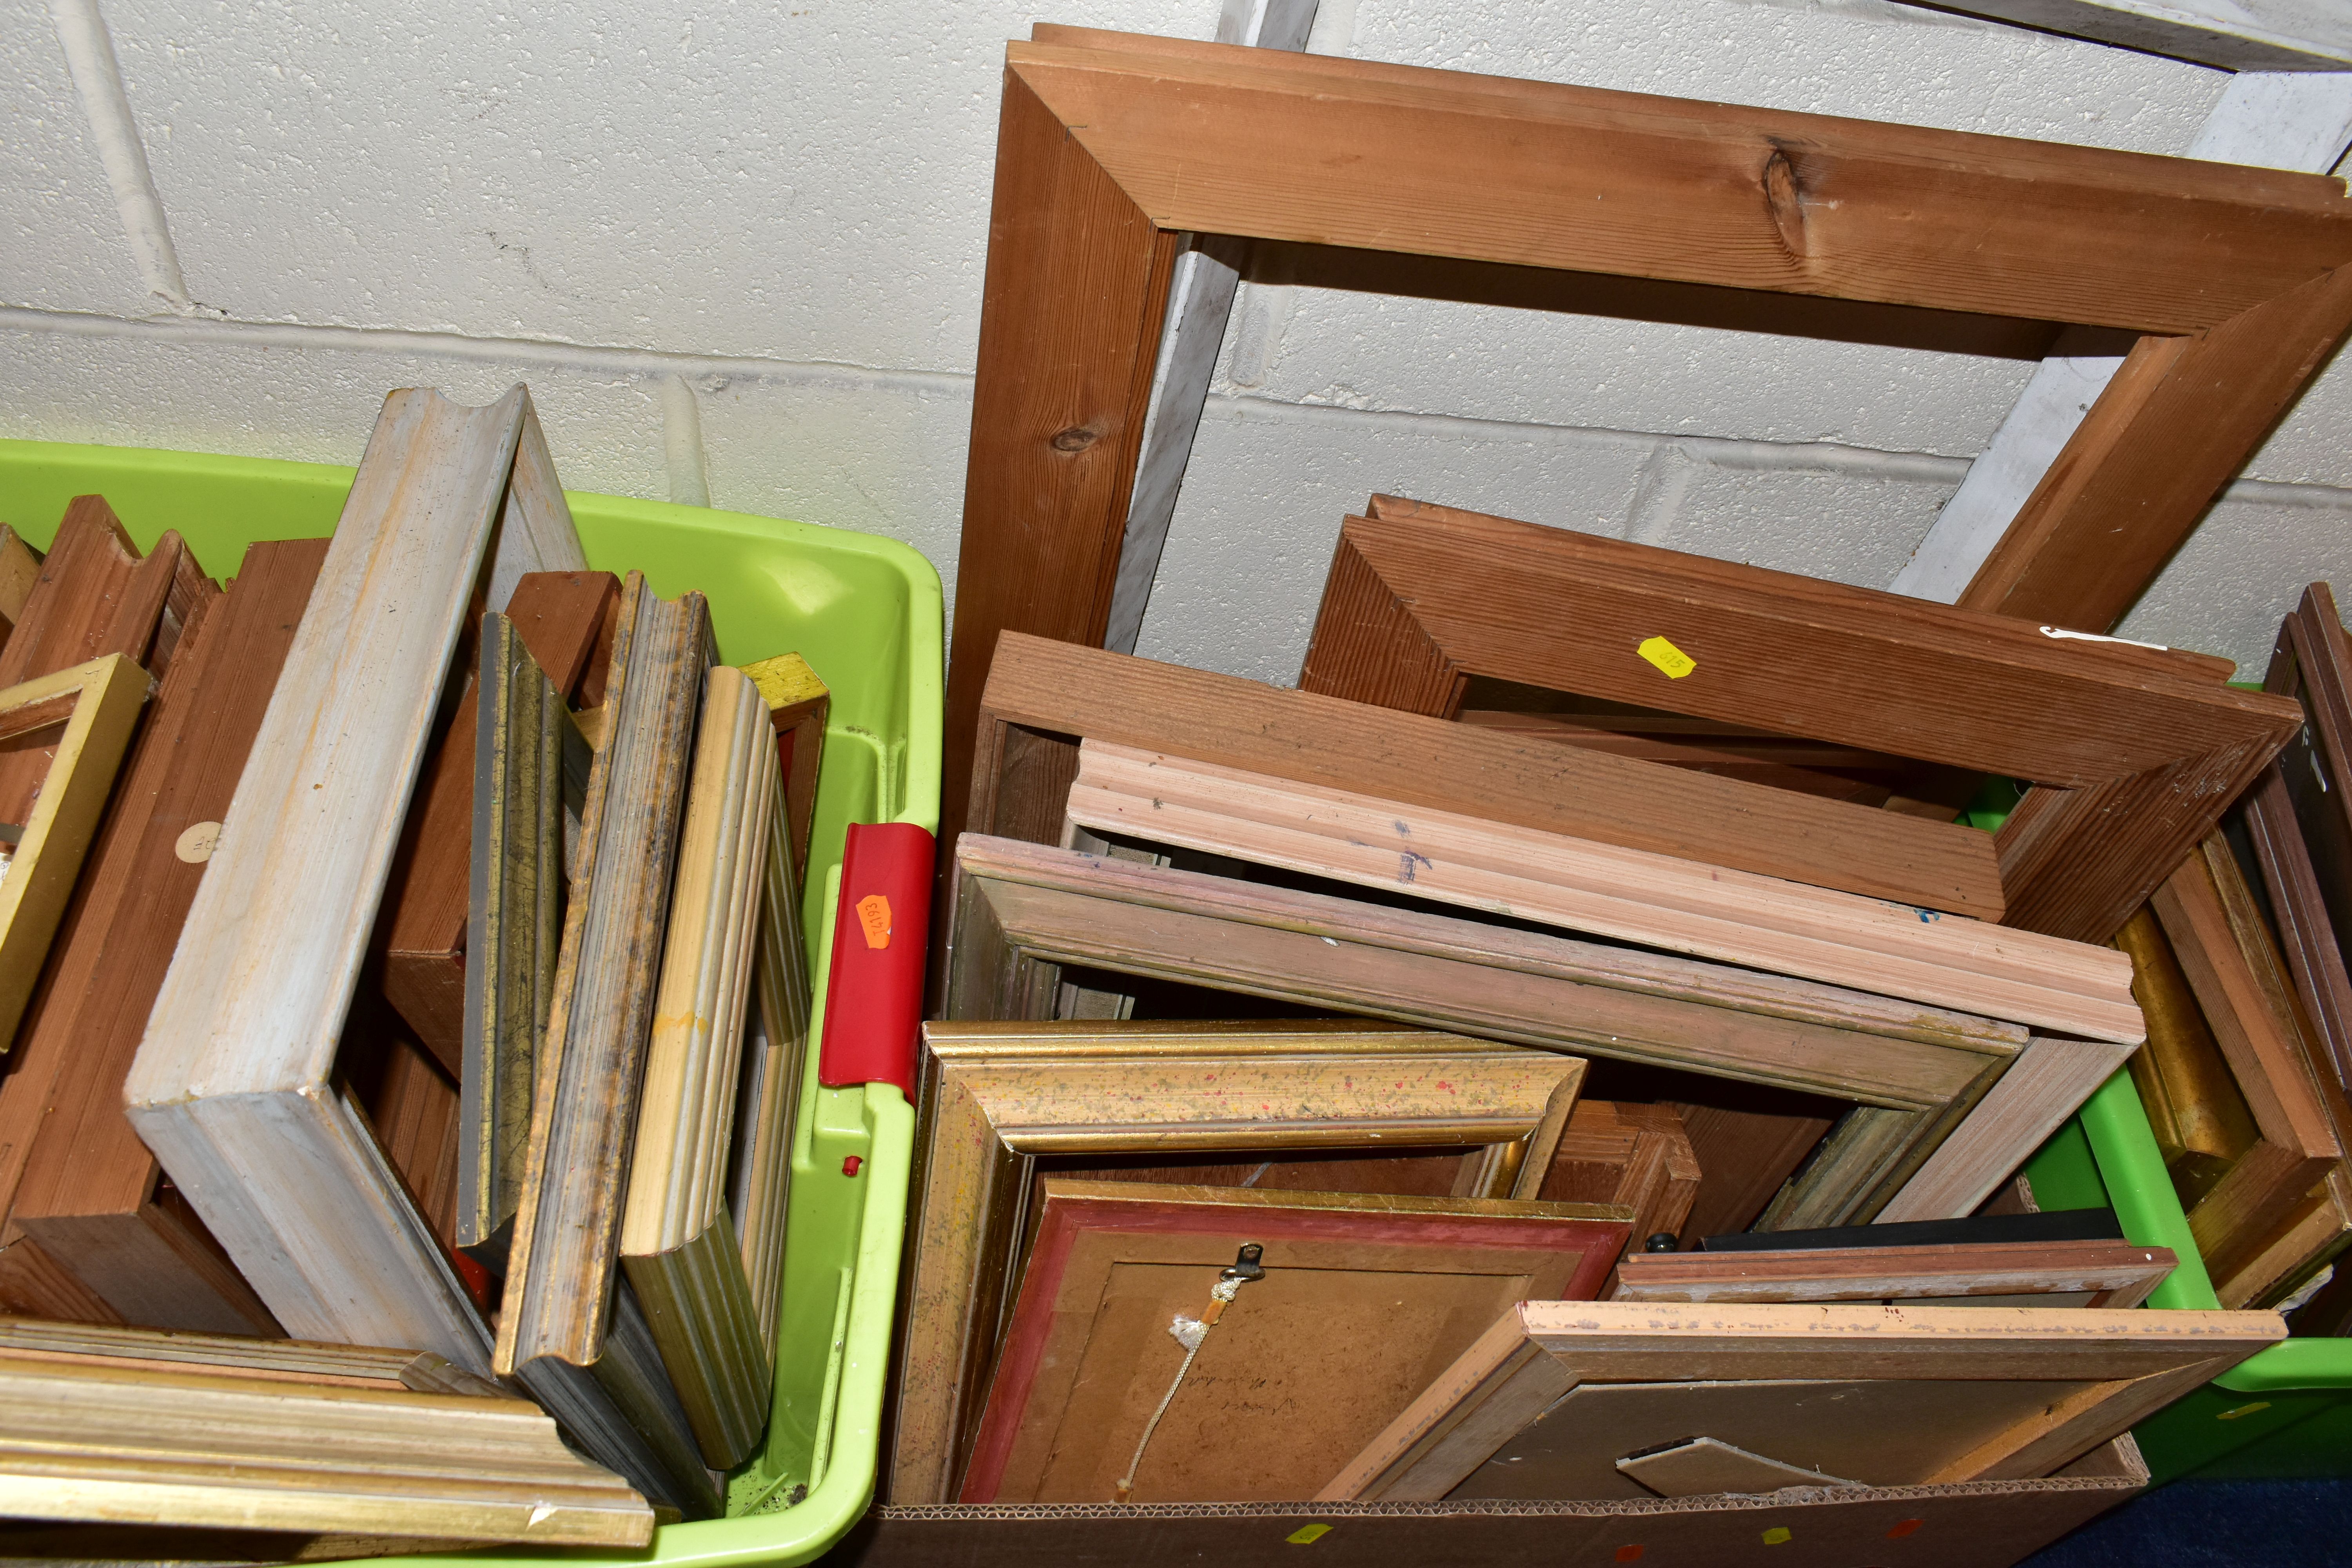 A QUANTITY OF WOODEN PICTURE FRAMES, assorted shapes and sizes, together with a small number of - Image 6 of 8